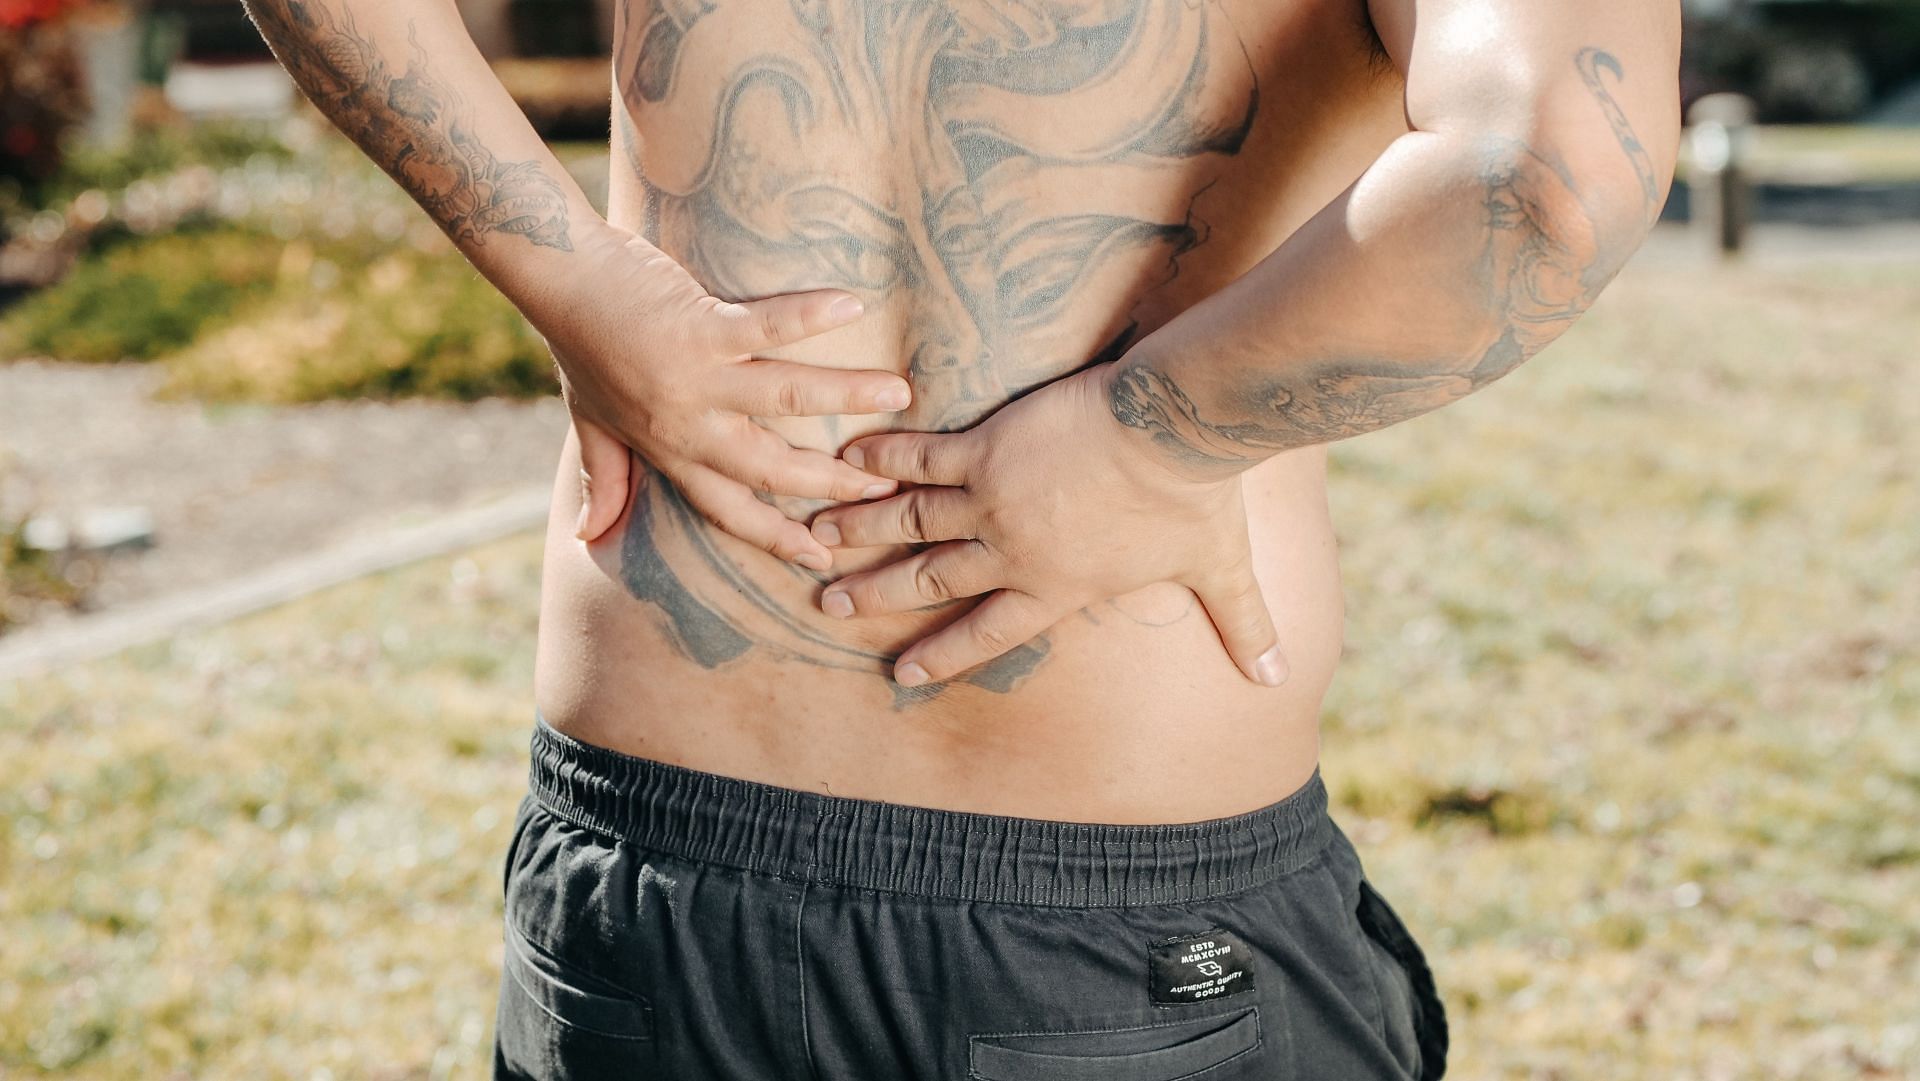 Herniated disc exercises can help relieve your lower back pain (Image via Pexels @Kindel Media)